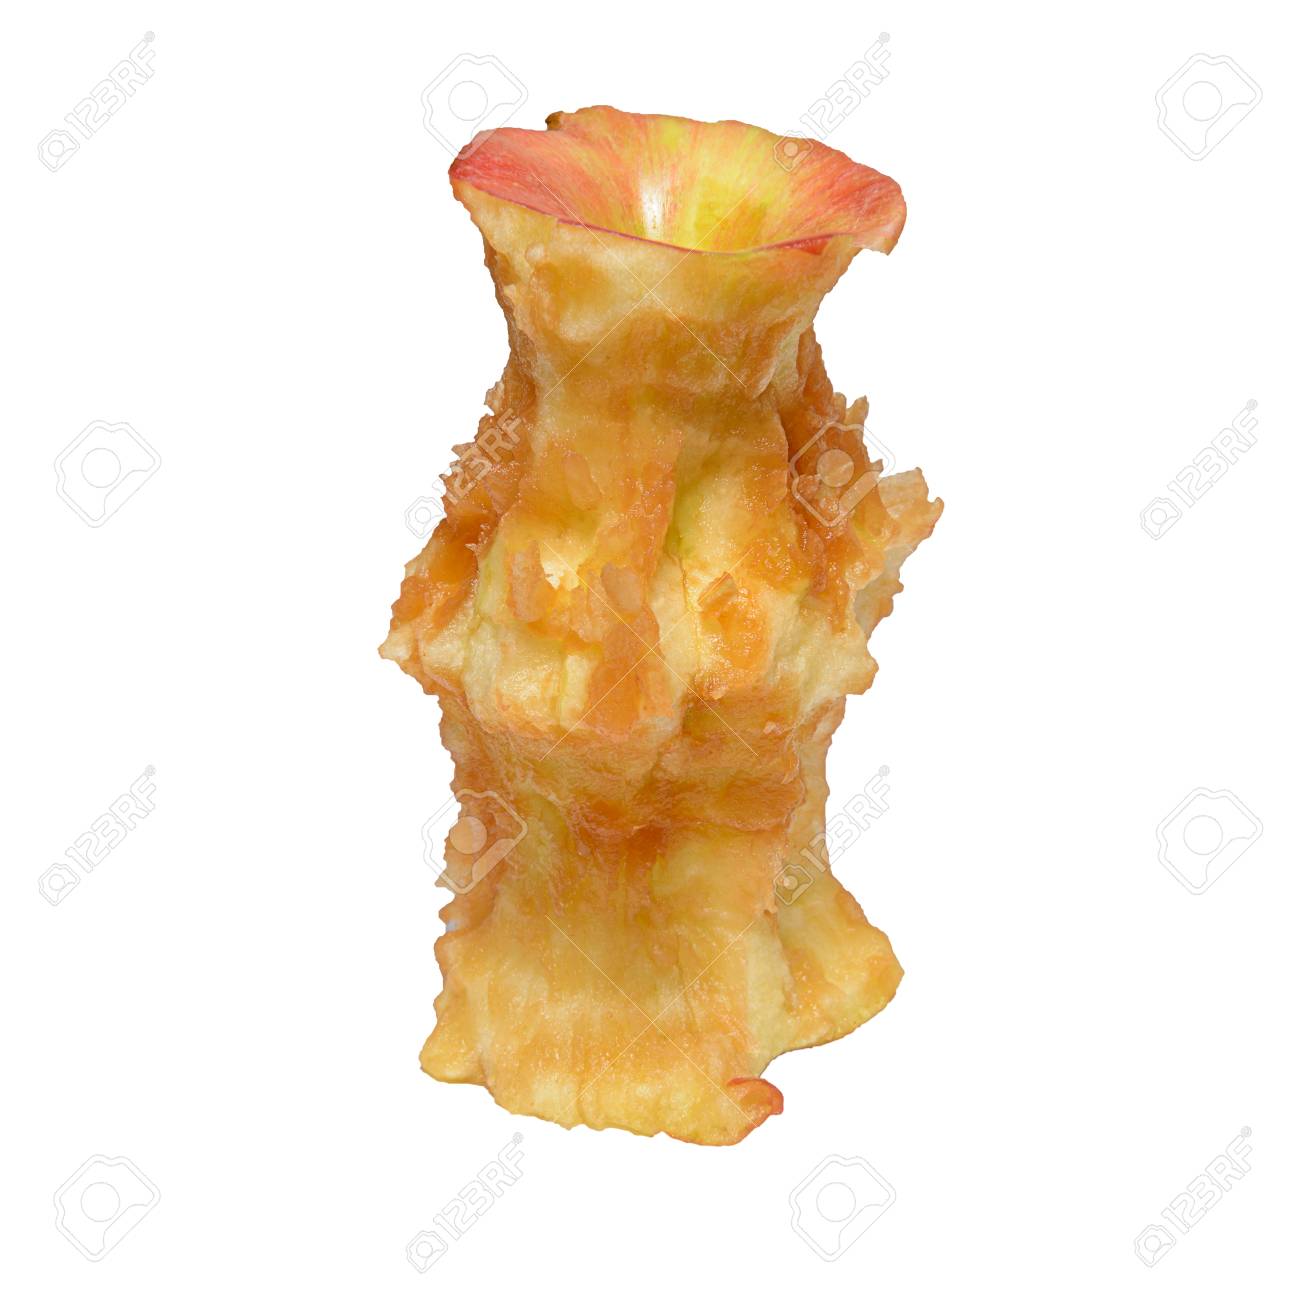 Bitten Stub Of An Apple On A White Background Stock Photo Picture